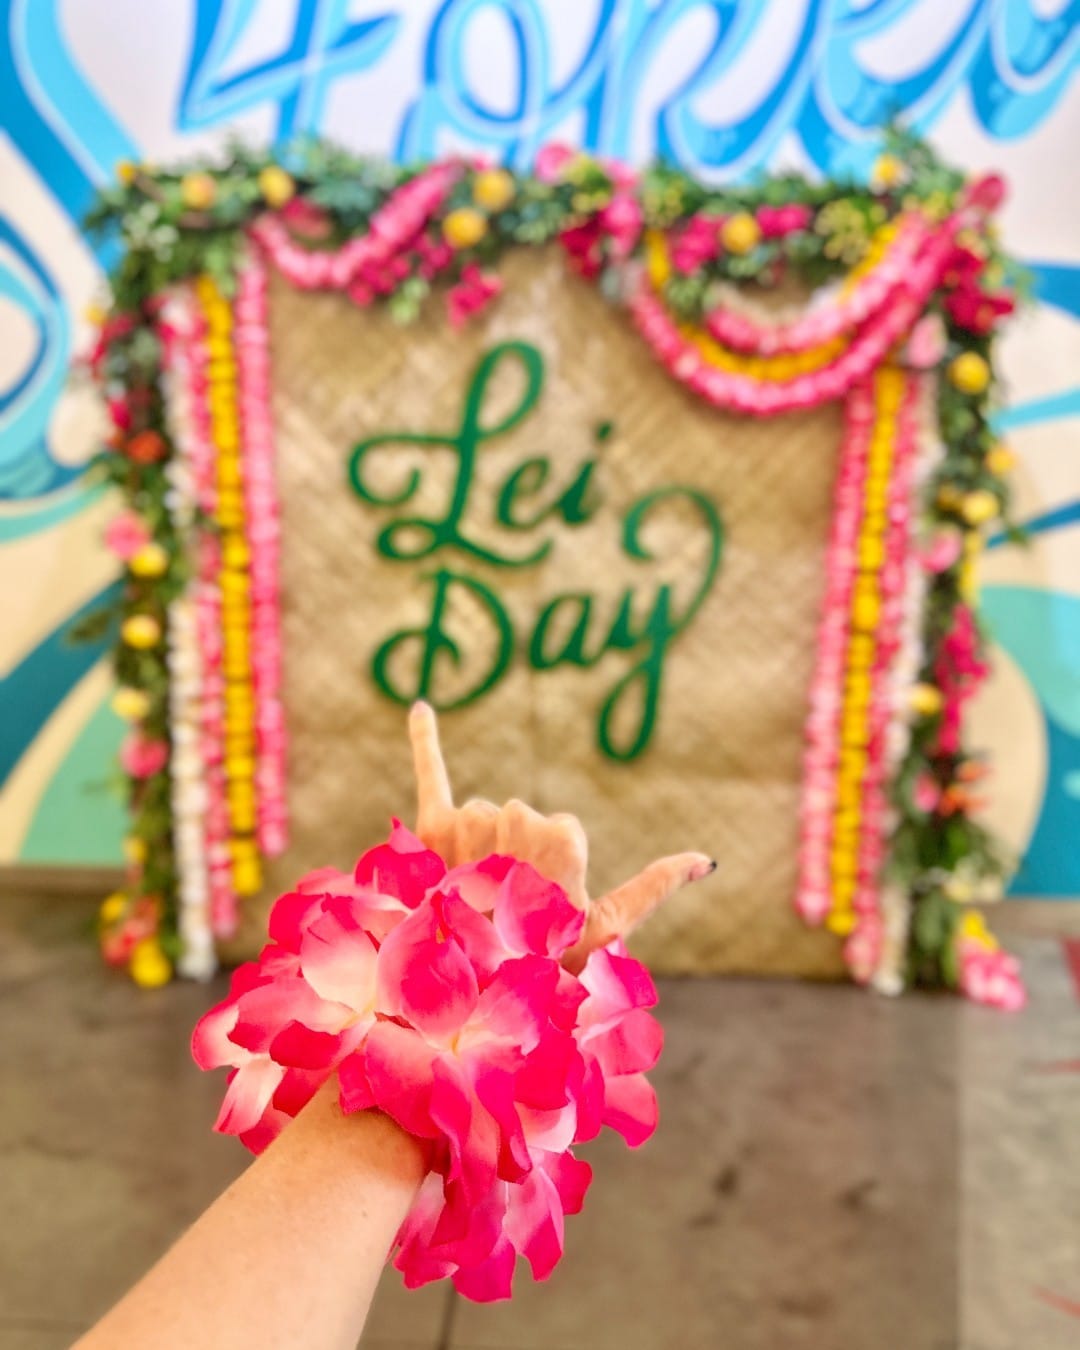 Happy Lei Day! Celebrate by taking photos with your family and friends at our floral wall in South Shore Market, on display throughout the month of May. Share your Lei Day images and tag @wardvillage. #LeiDay #wardvillage